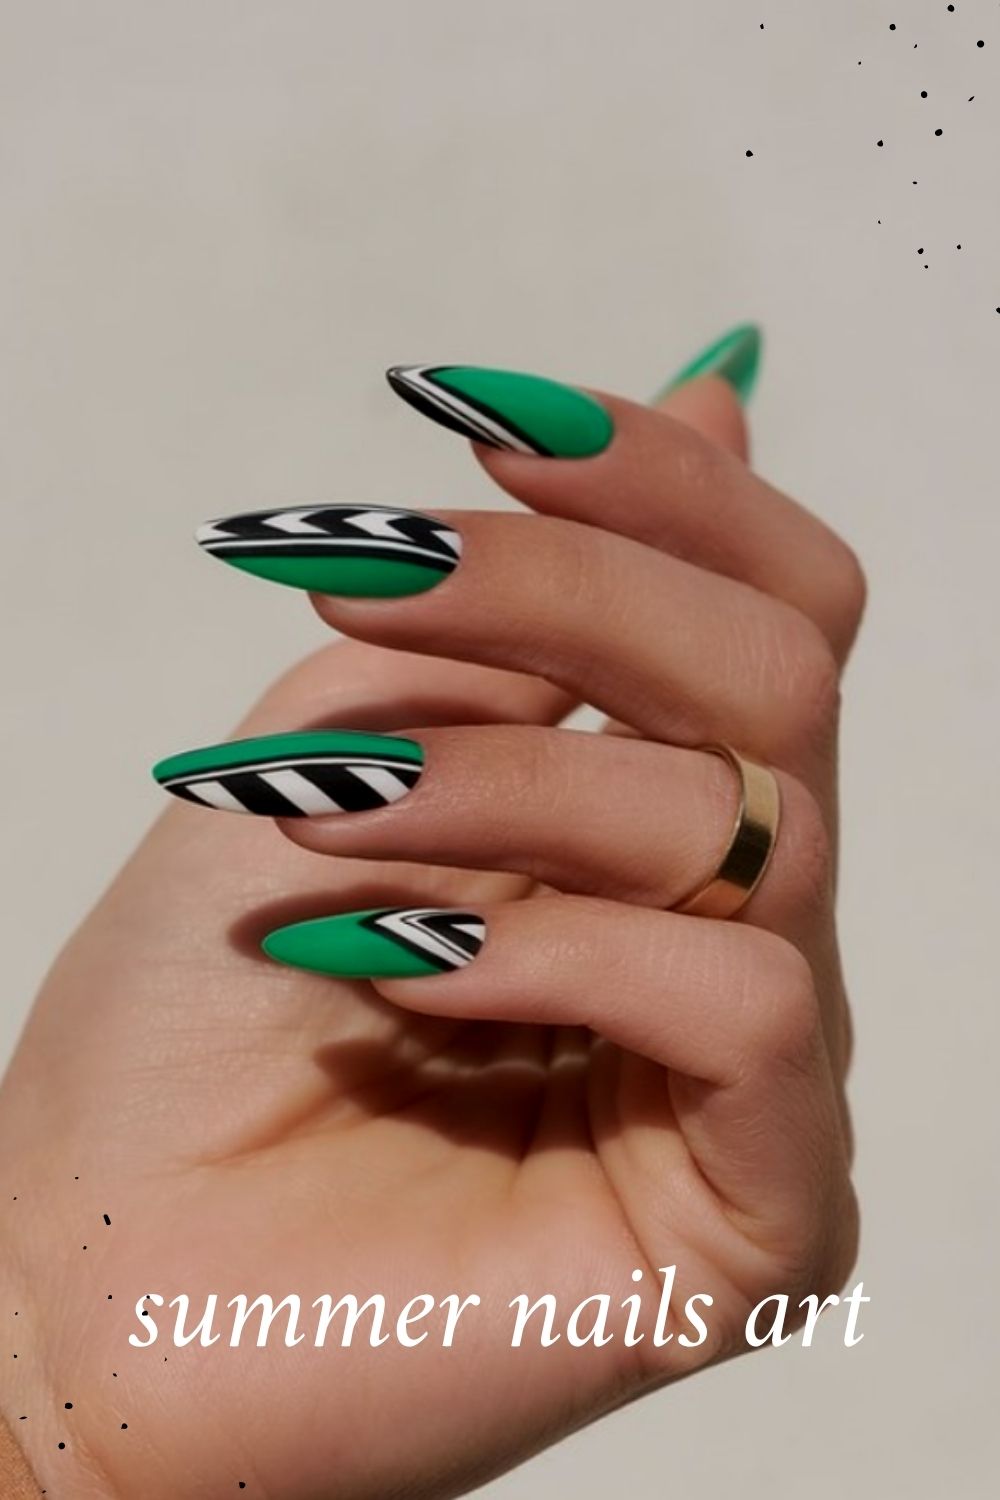 Green and black almond nails